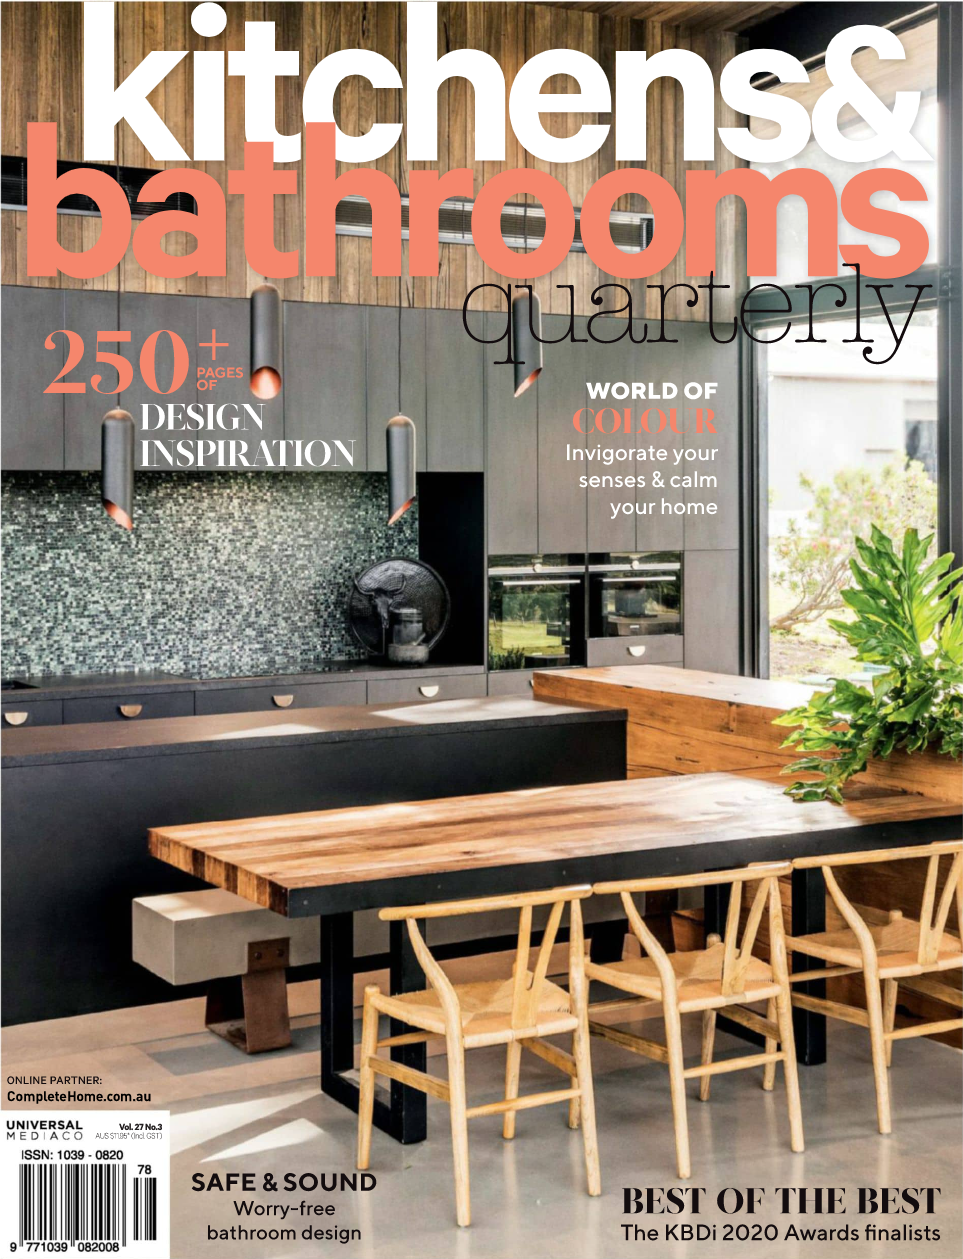 ‘Kitchens and Bathrooms Quarterly” vol. 27 no 3